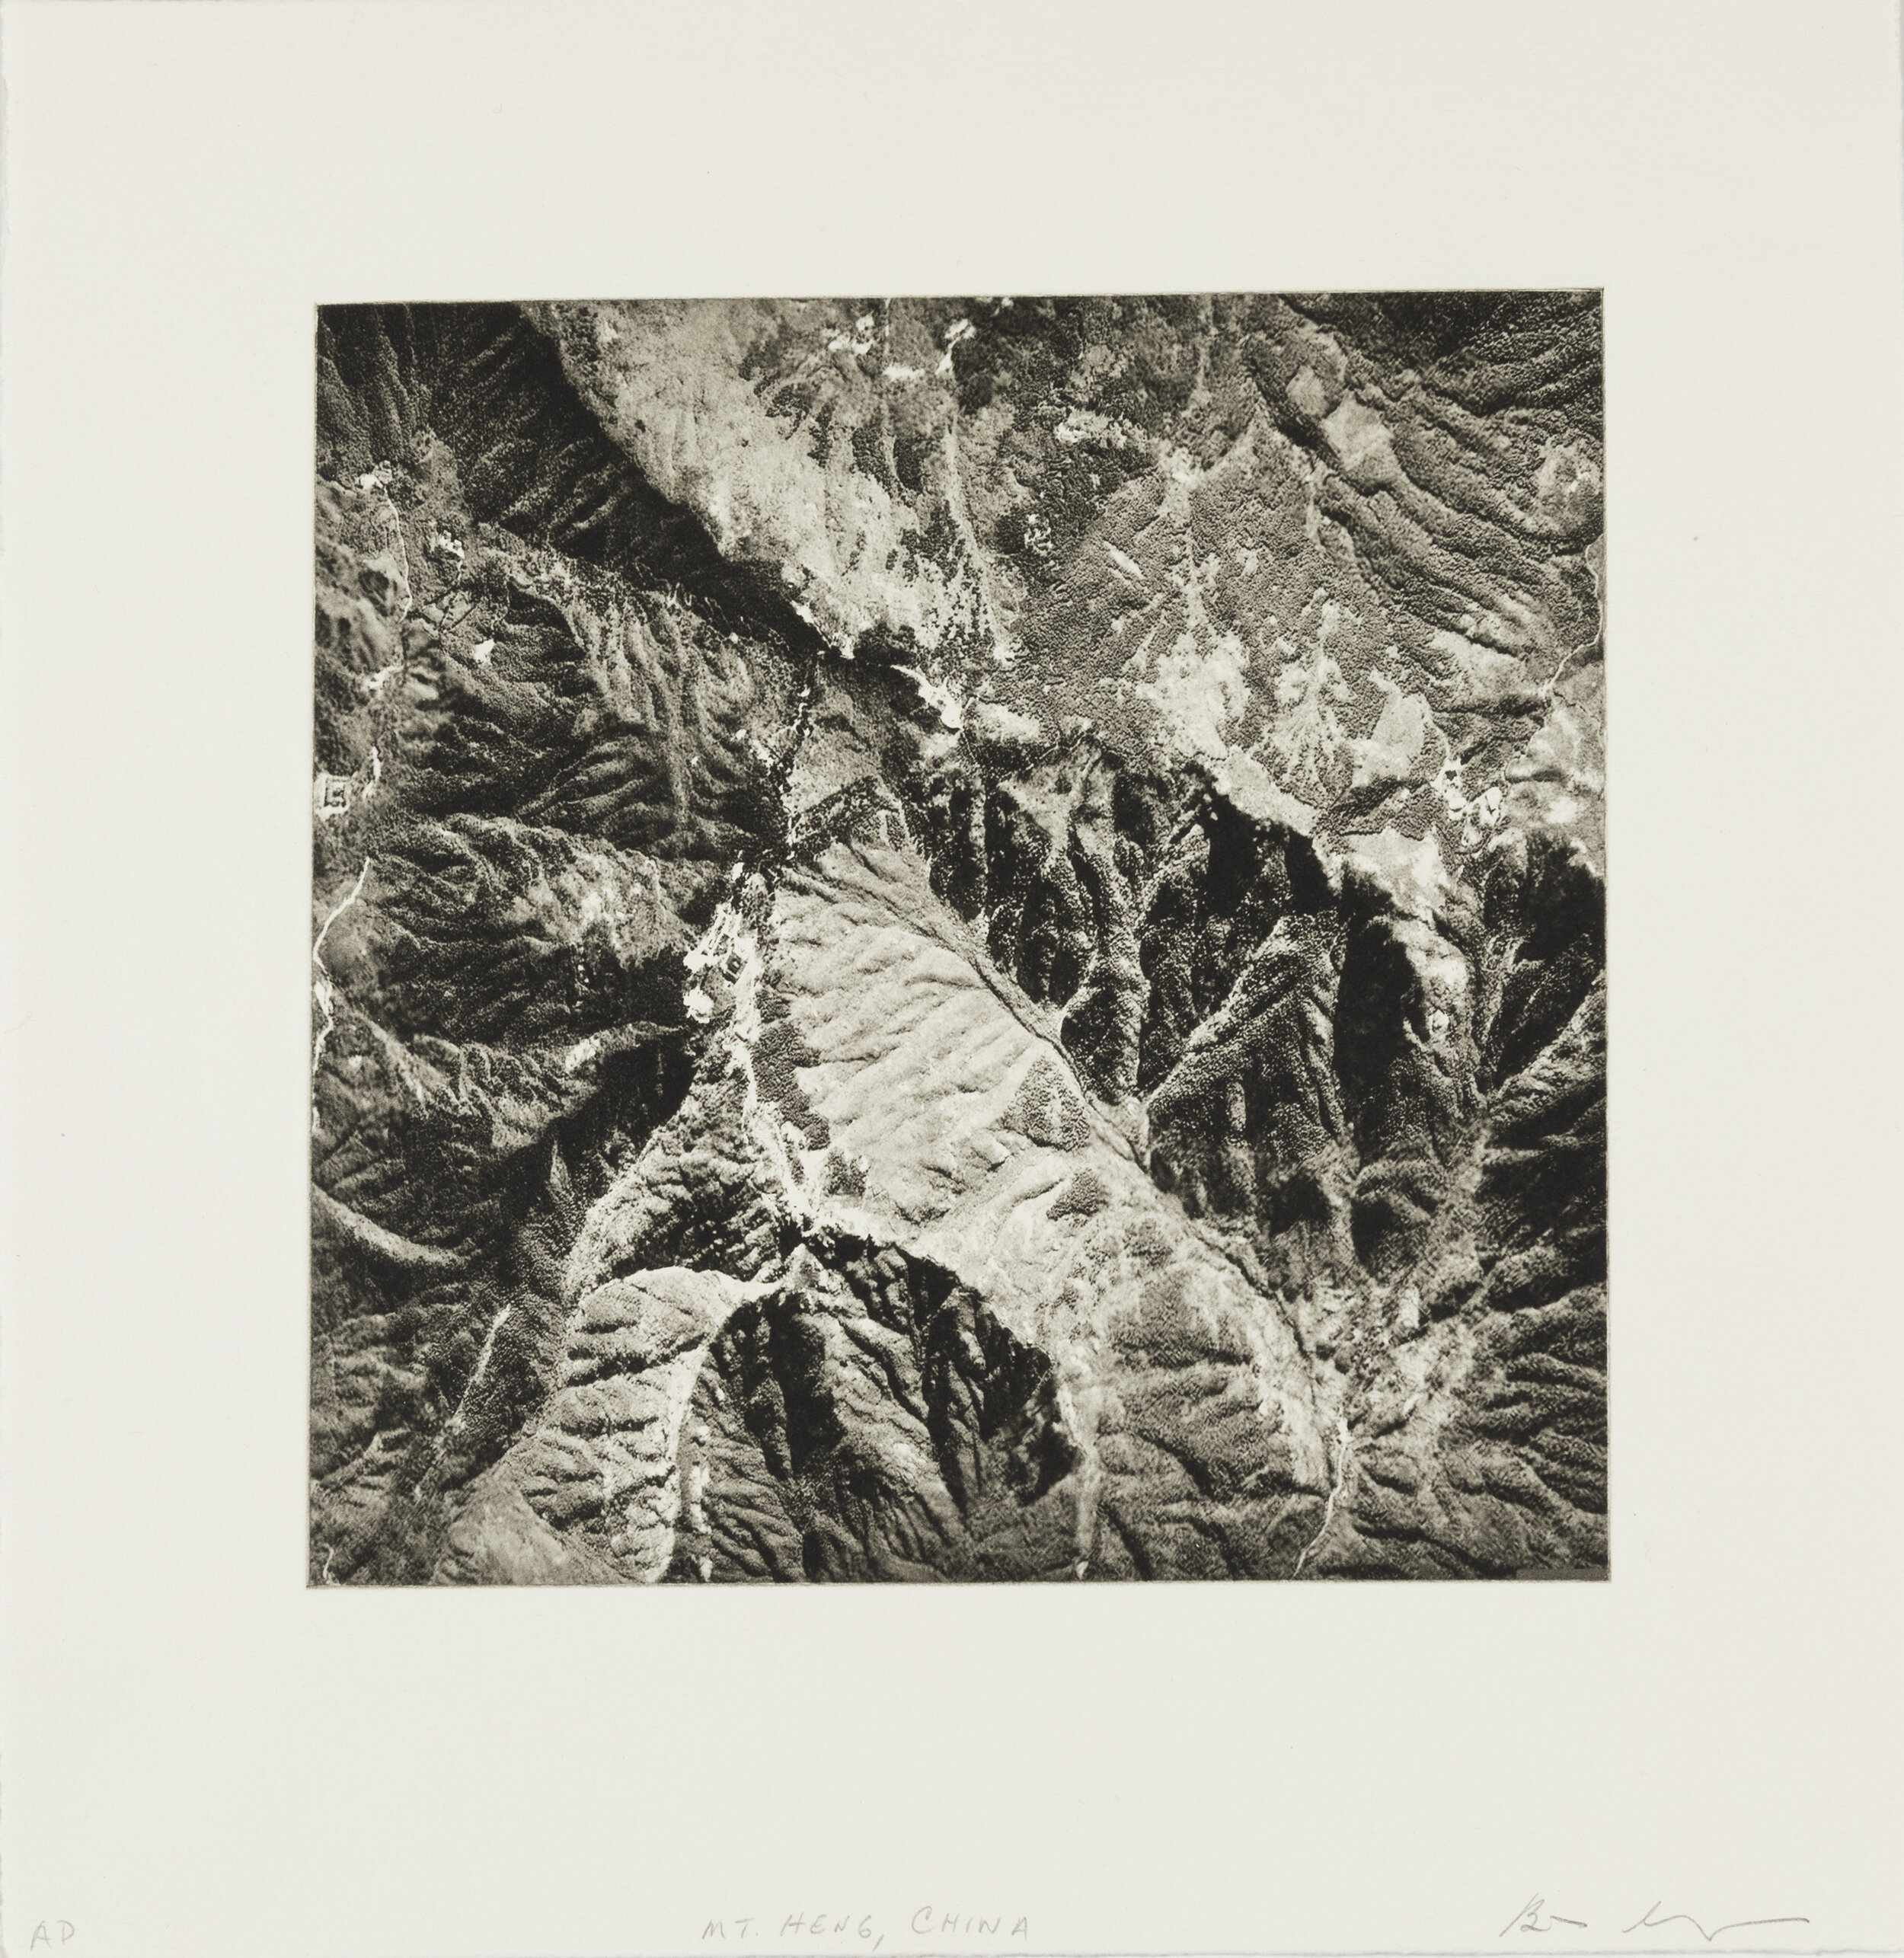    Mt Heng, Shanxi, China  , 2019  Copperplate photogravure etching on cotton rag paper, plate size; 10.6” x 10.6”, paper size; 16” x 15.5”, edition 10  